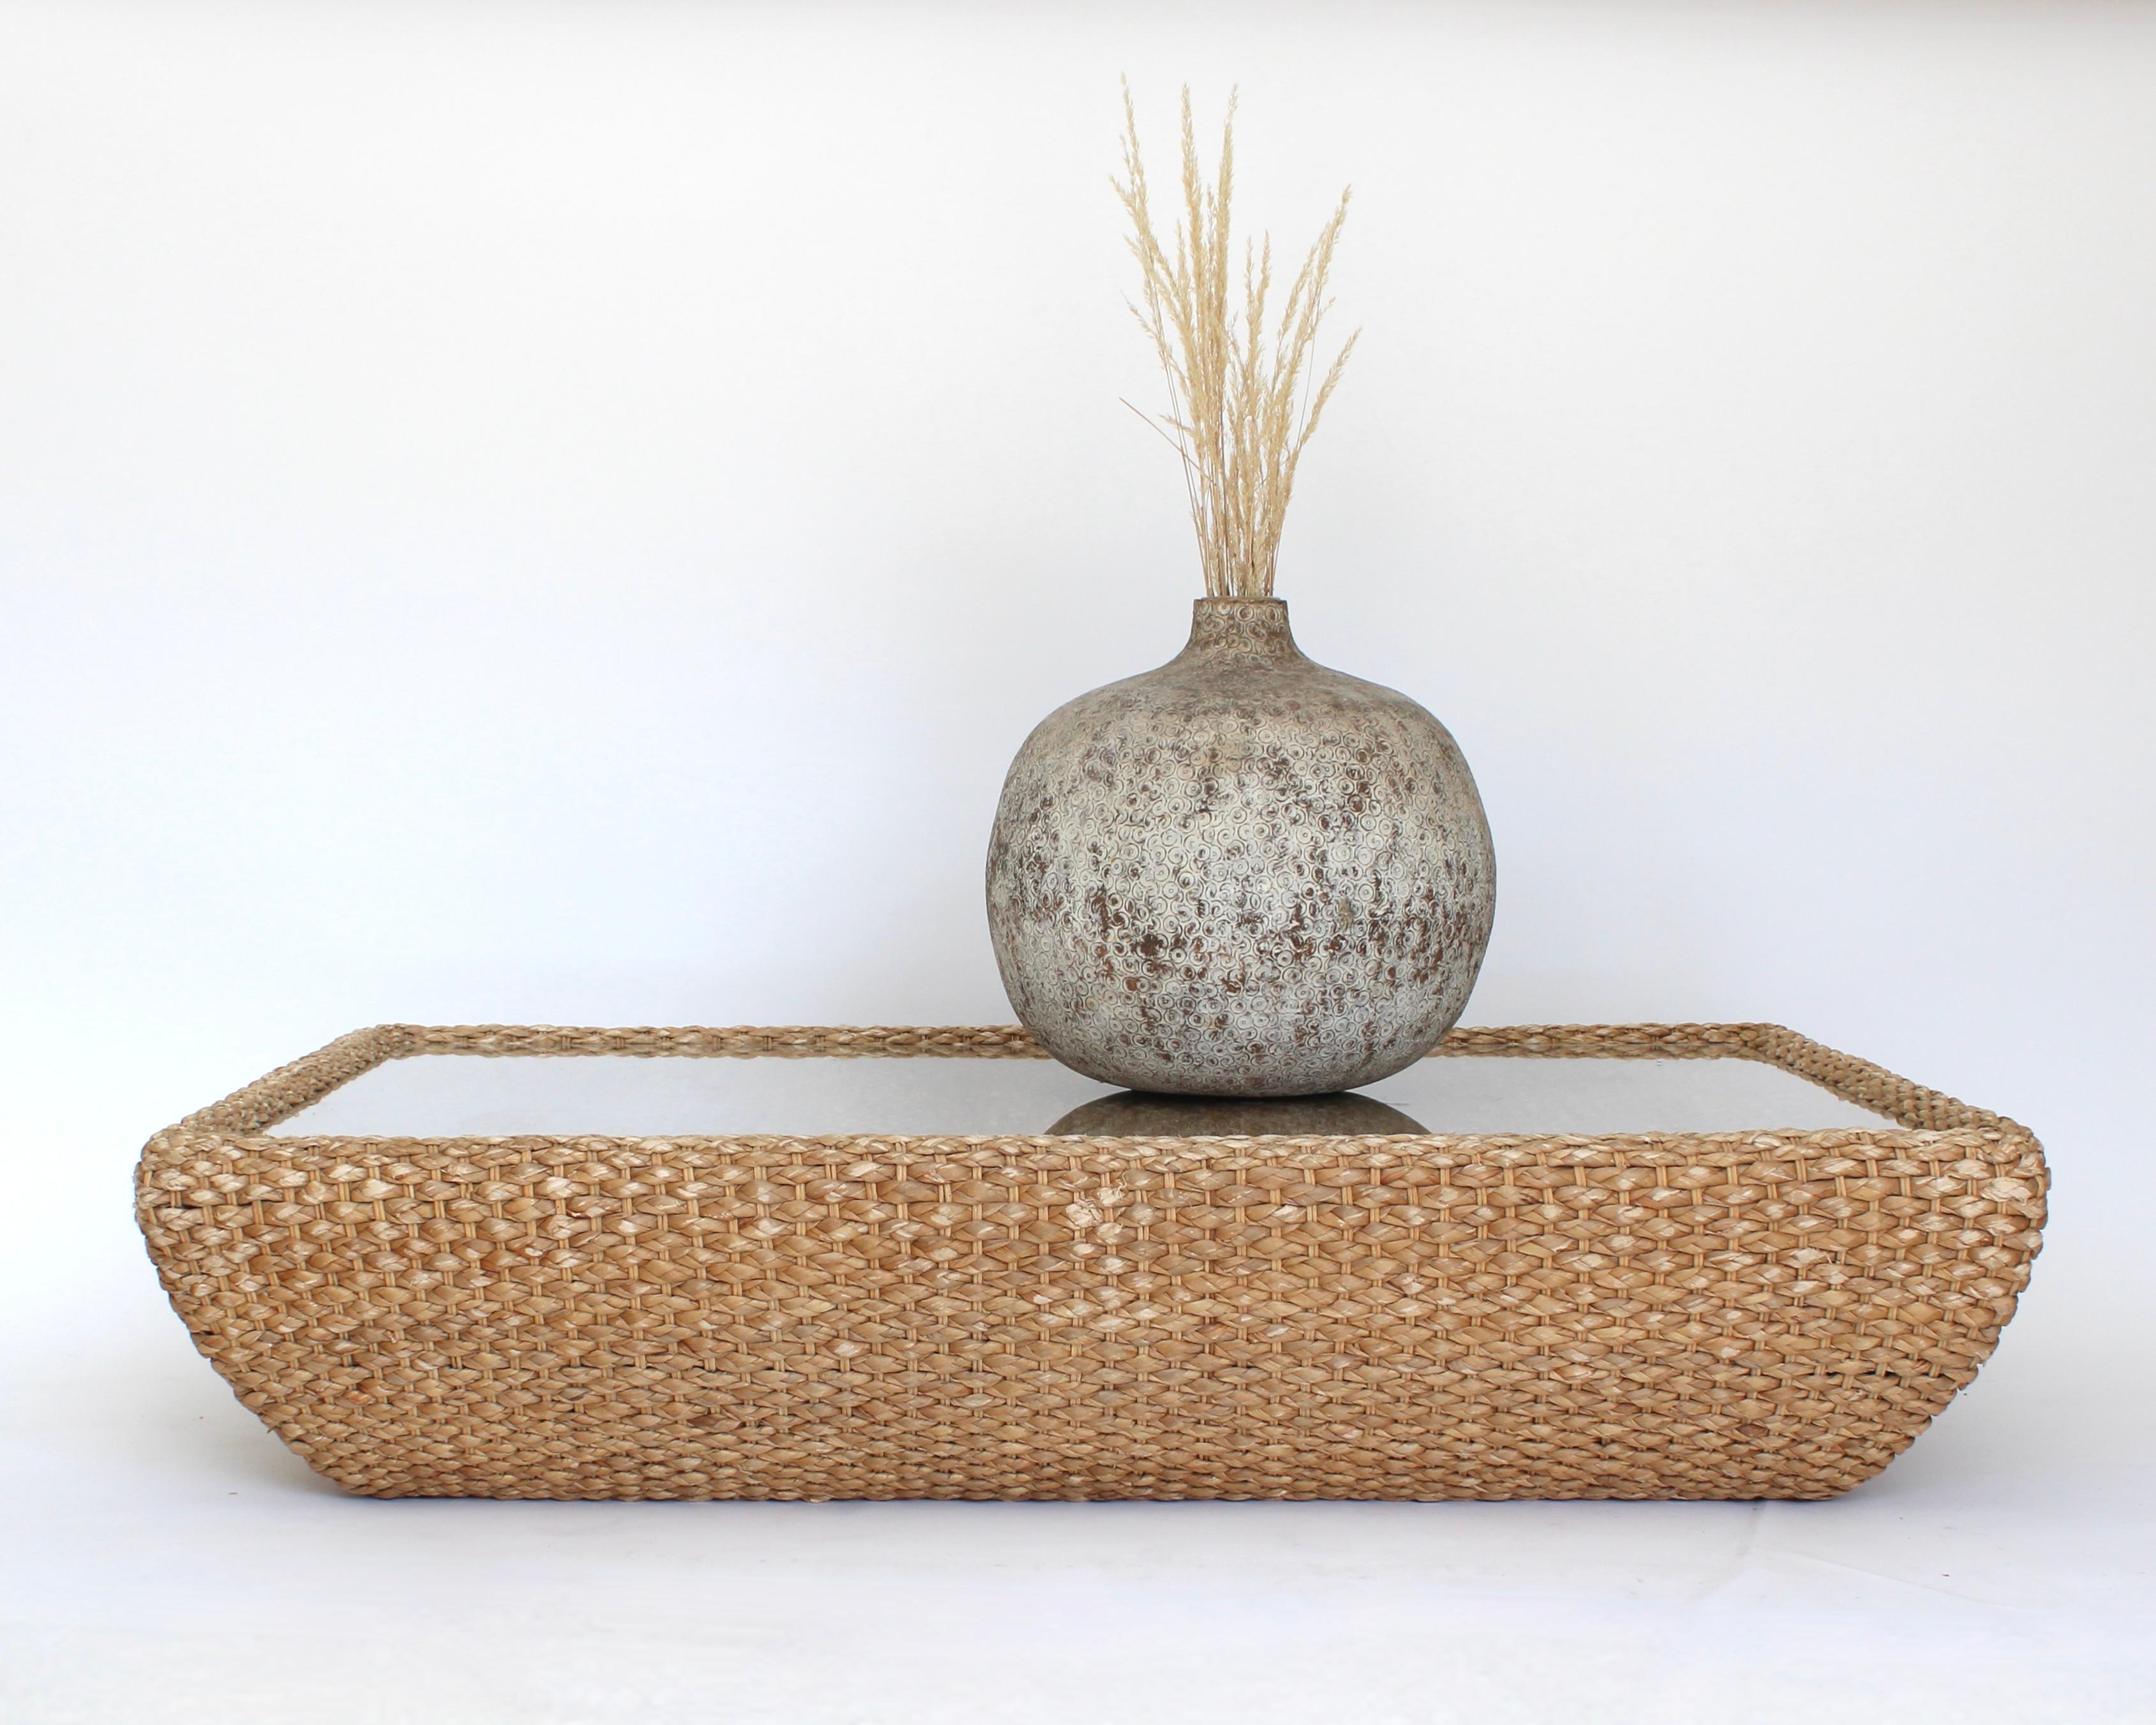 Large glass topped raffia woven based rectangular coffee table that sits directly on the floor. Great beach house vibes. Natural materials make this coffee table perfect for the beach, Malibu or desert location. 
Great condition with no tears to the